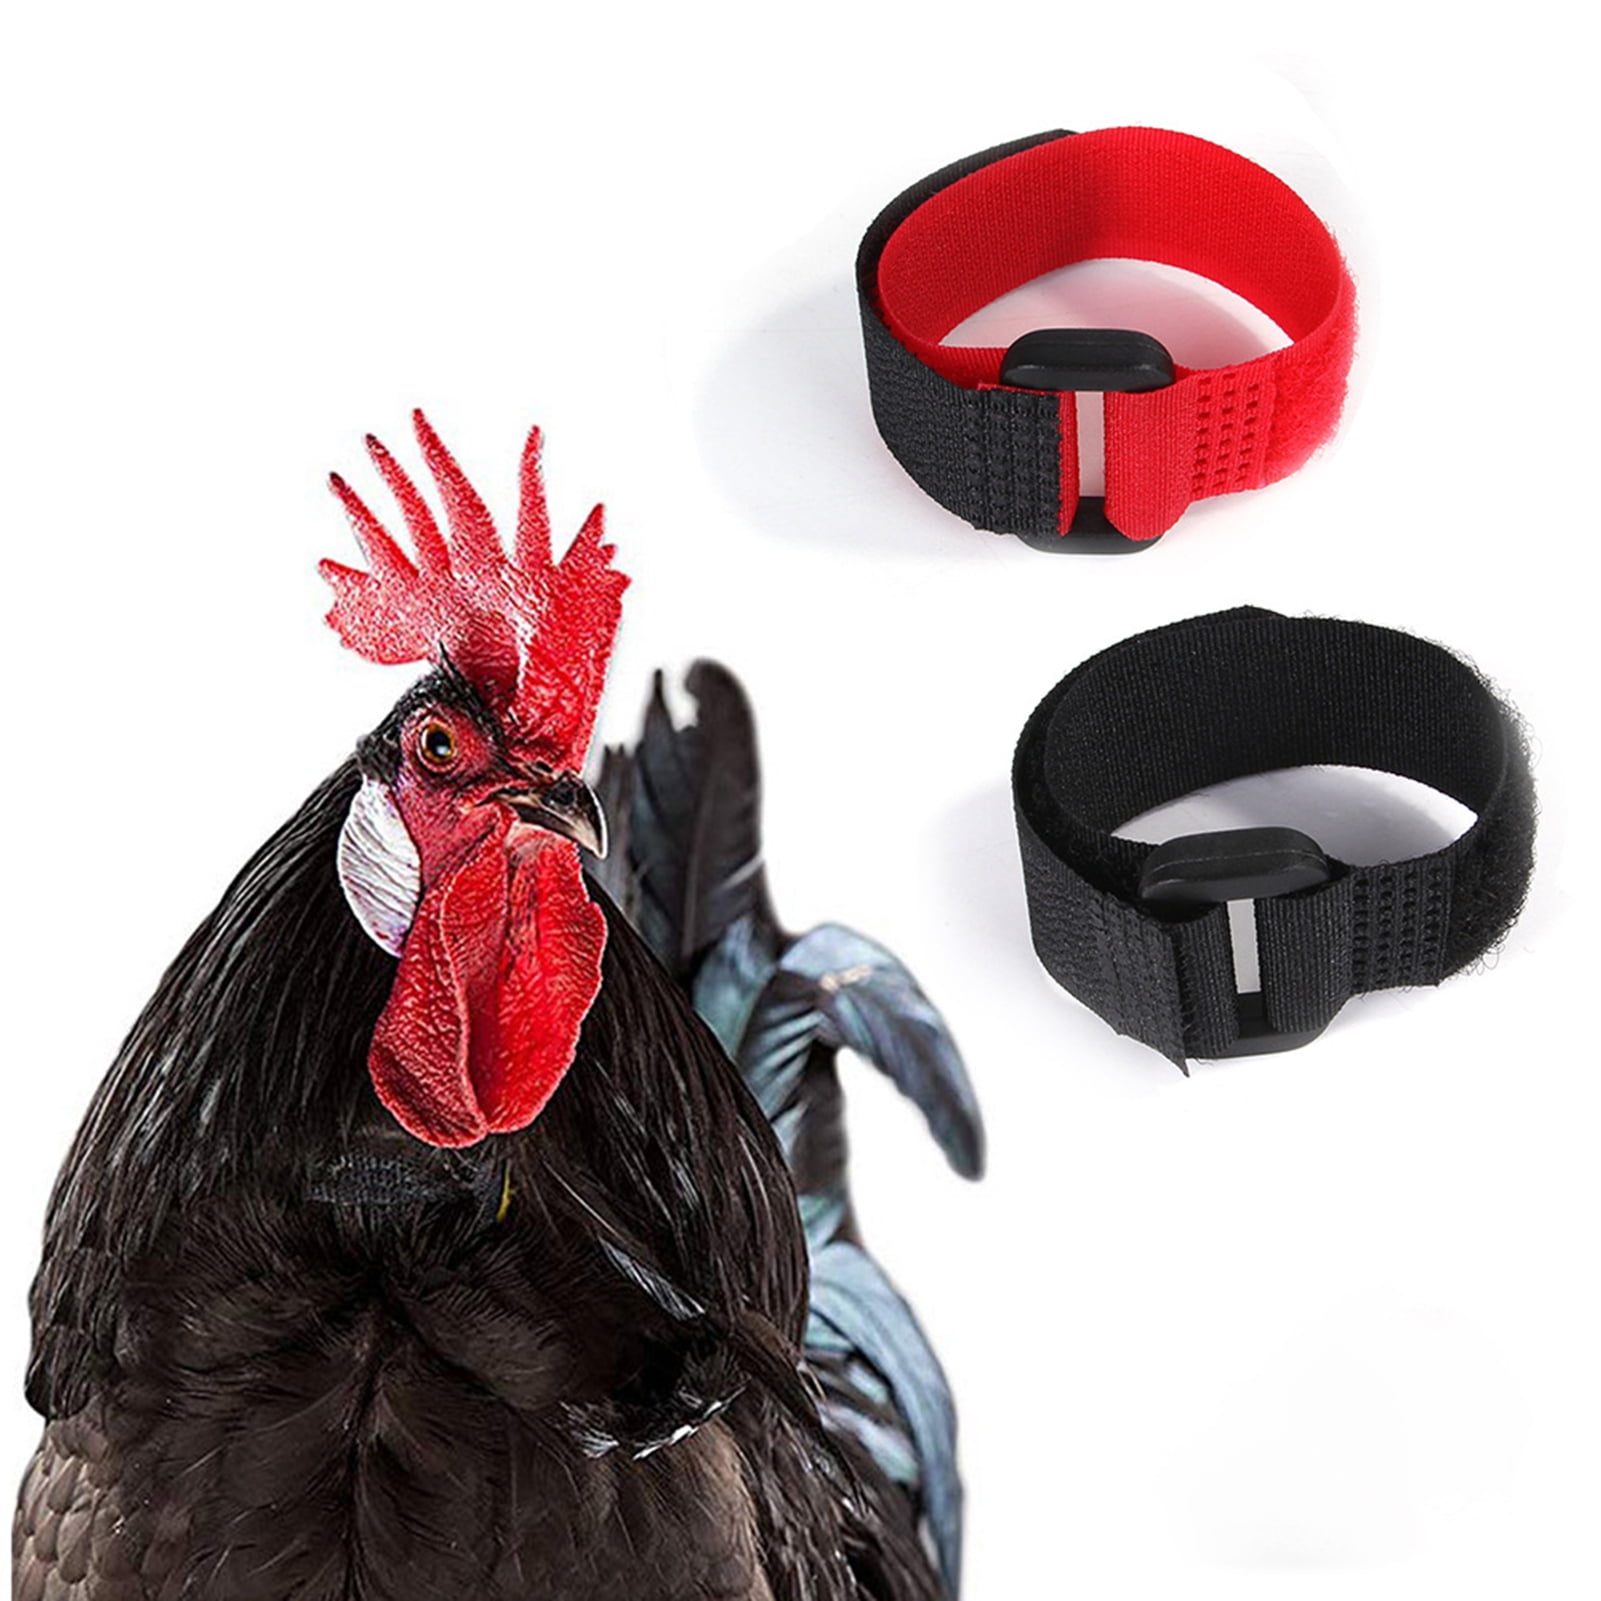 Windfall 2pcs Anti Crow Rooster, Collar Crow Rooster Collar Crow Collar, Chicken Neckband Noise Free No Crow Neck Belt Anti Noise Nylon Neck Belt for Prevent Chickens from Screaming